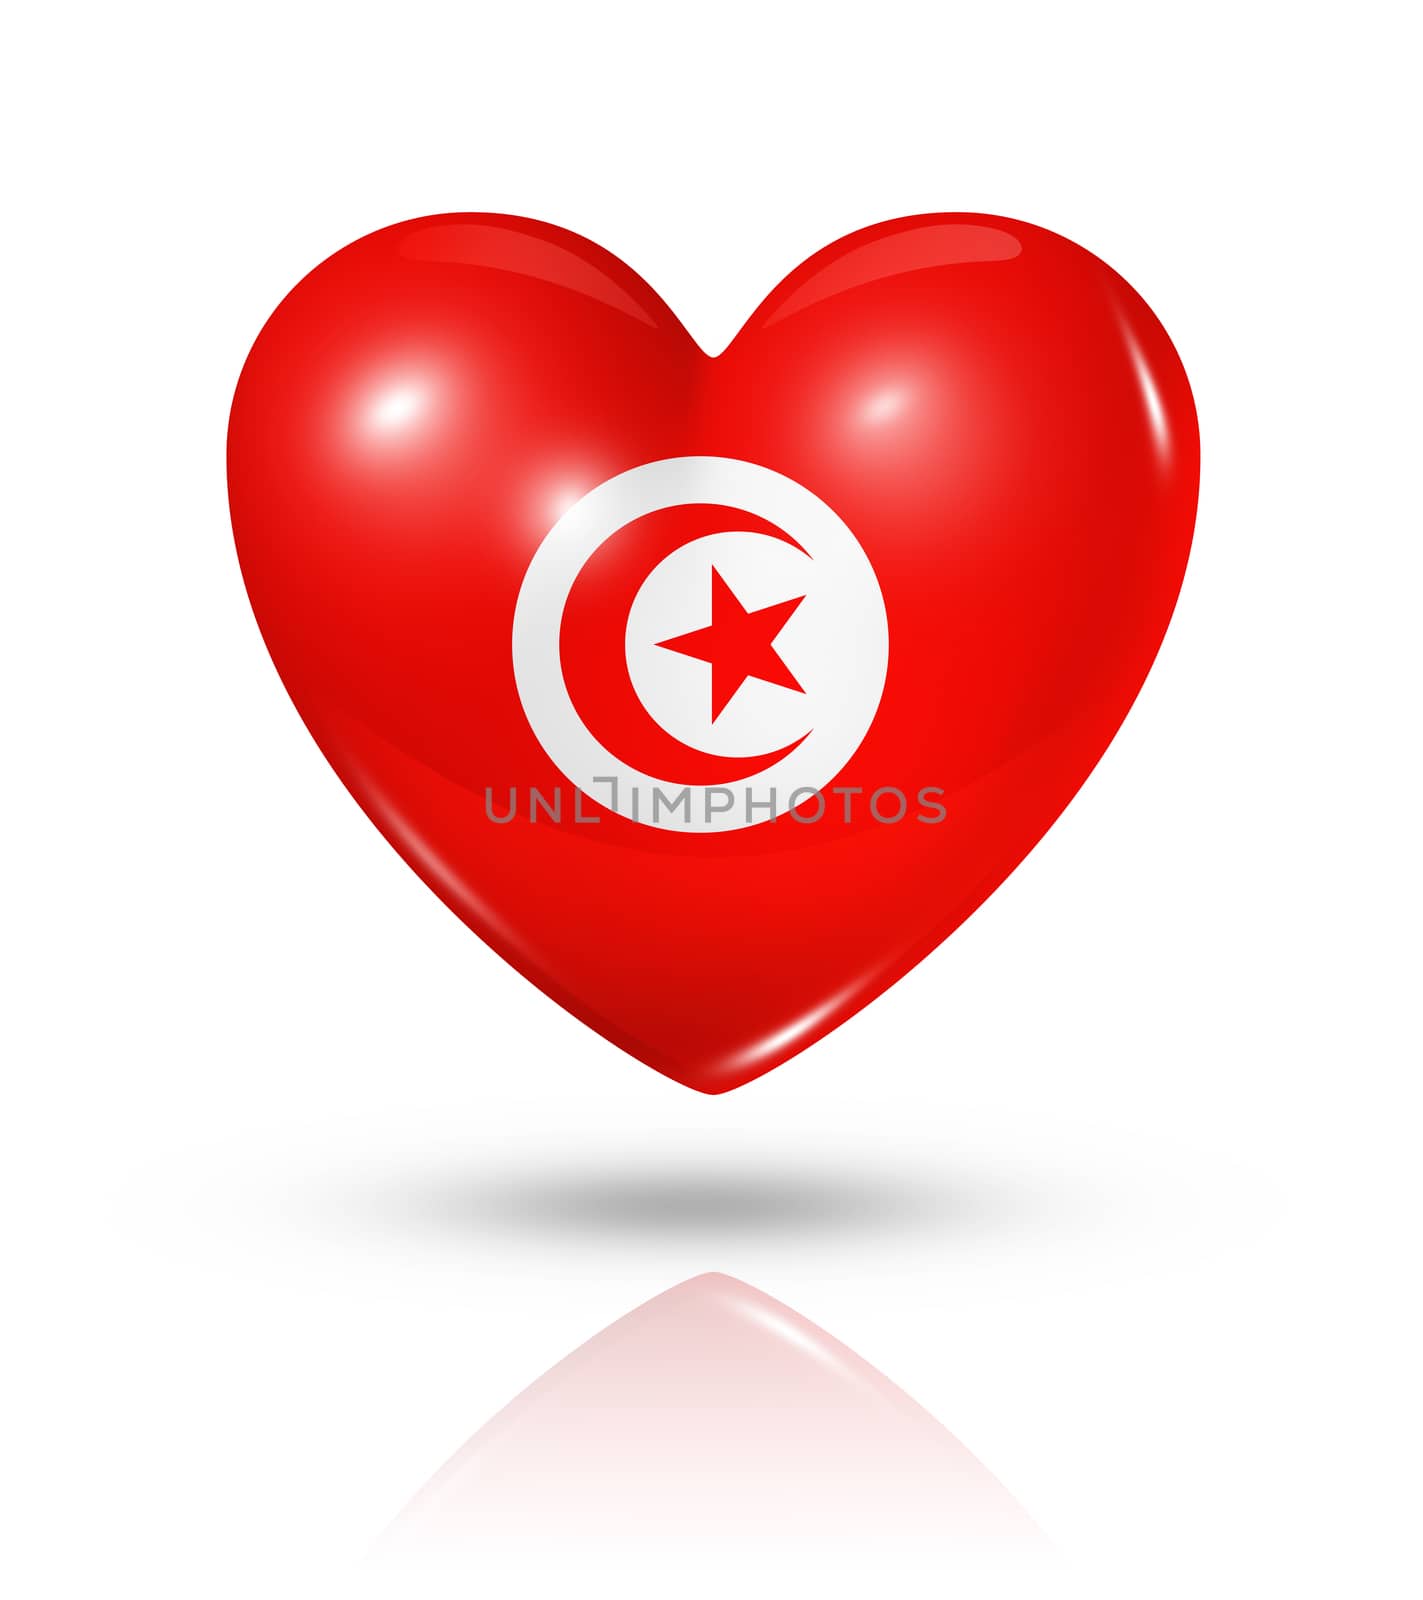 Love Tunisia symbol. 3D heart flag icon isolated on white with clipping path